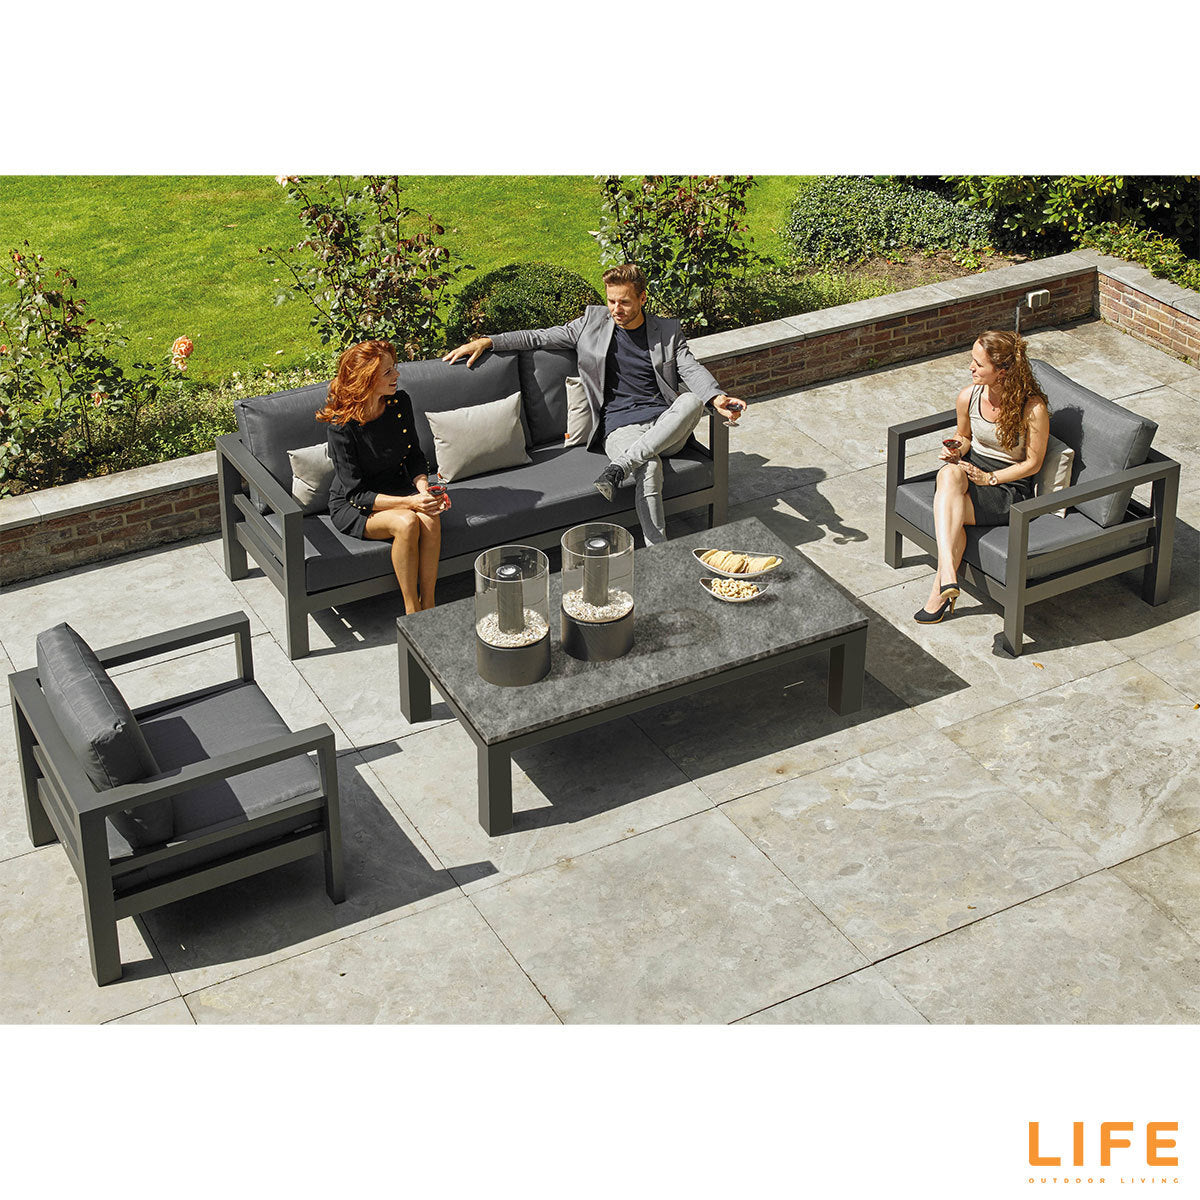 LIFE Outdoor Living Lava 4 Piece Patio Set with Concept Coffee Table